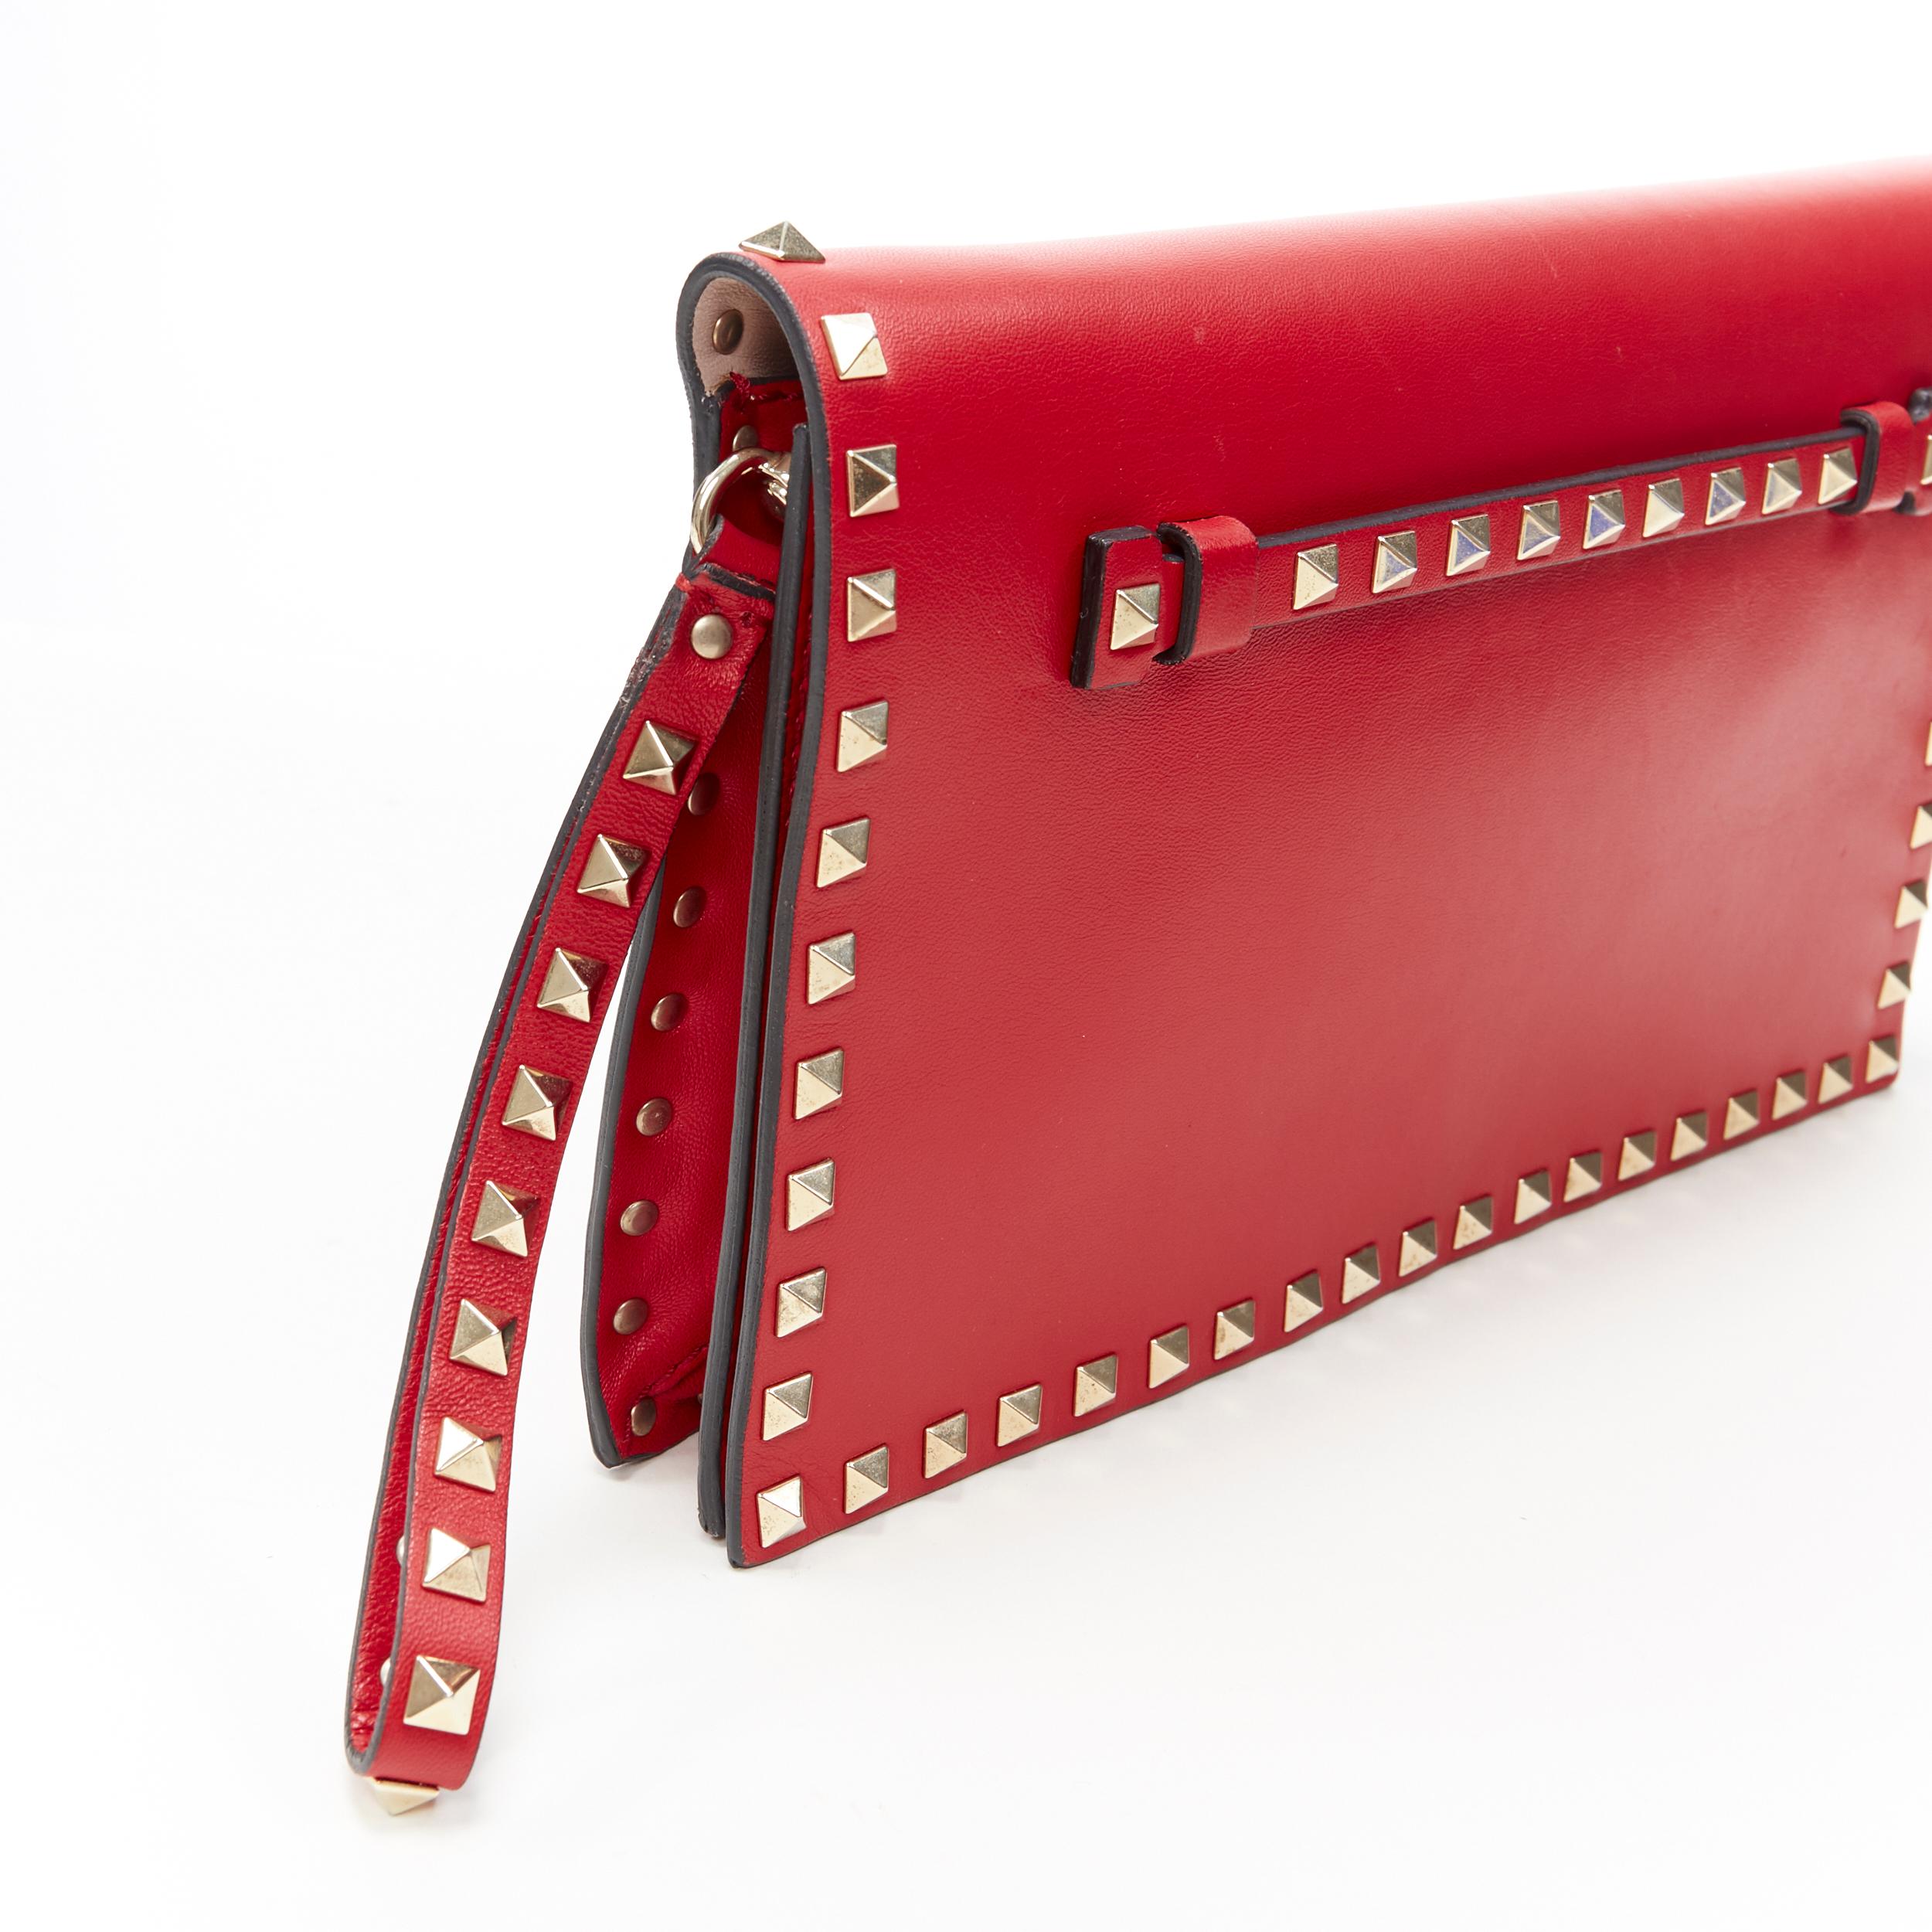 Red VALENTINO Rockstud red leather gold studded bordered wristlet flap clutch bag